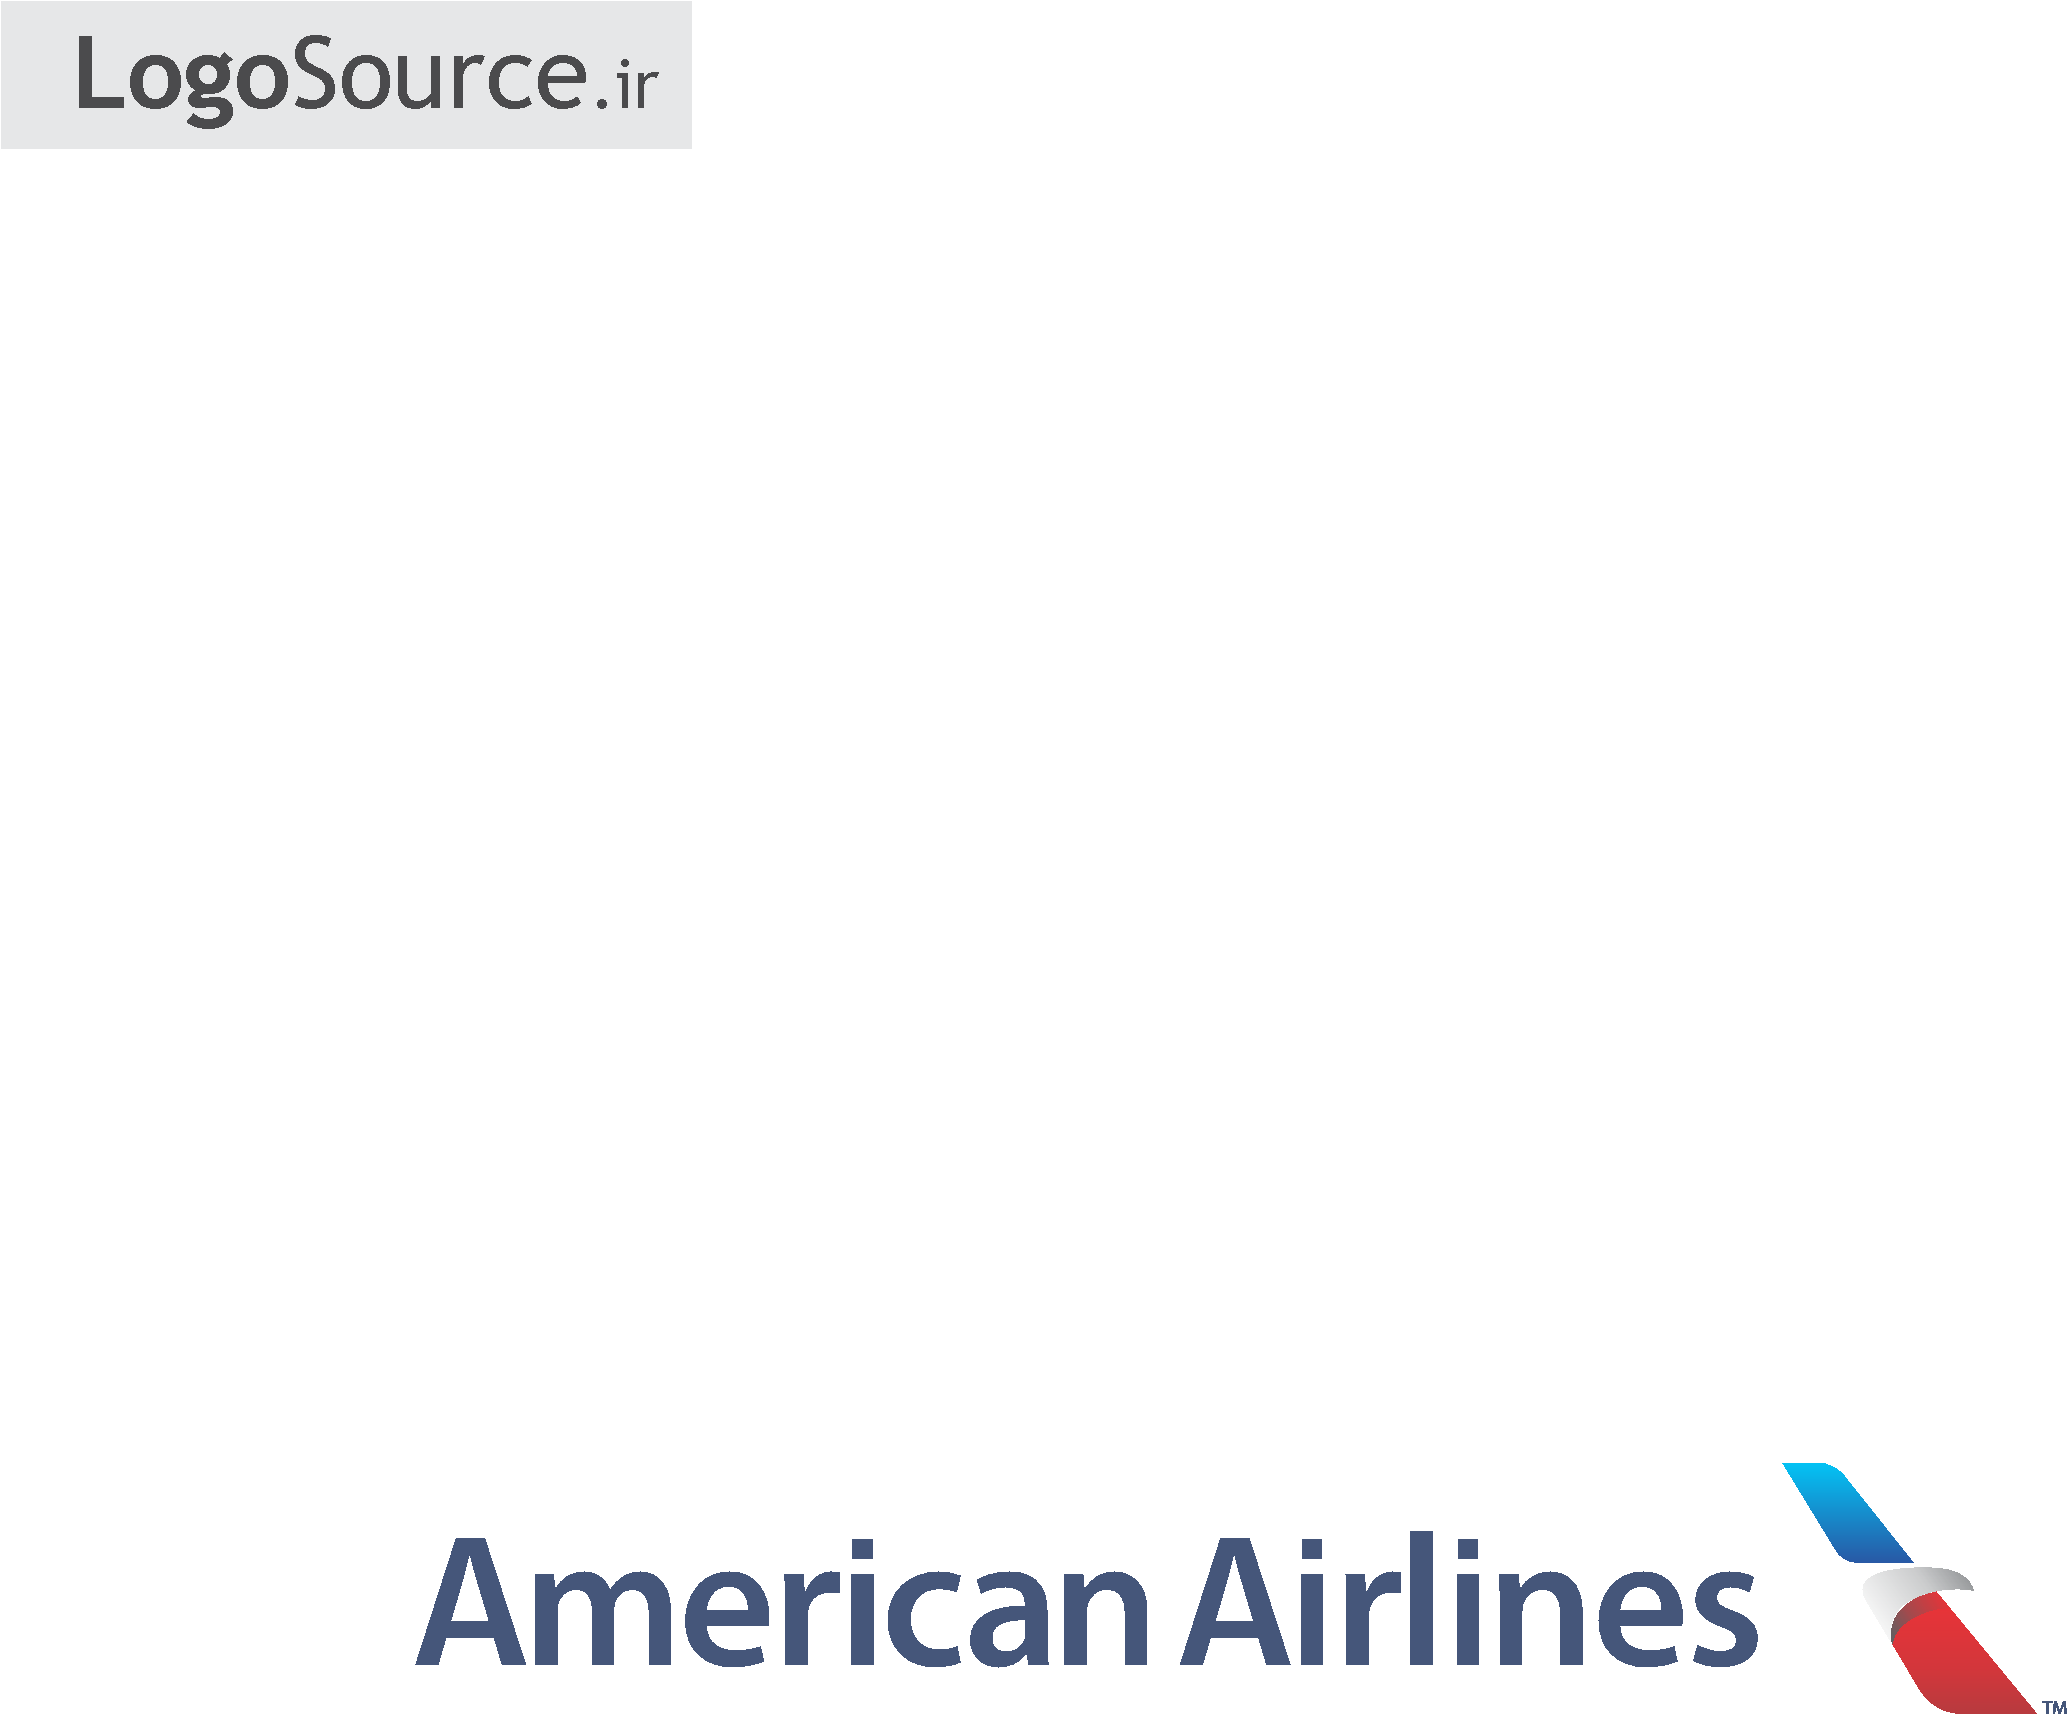 File Png - American Airlines Group (2480x3507)